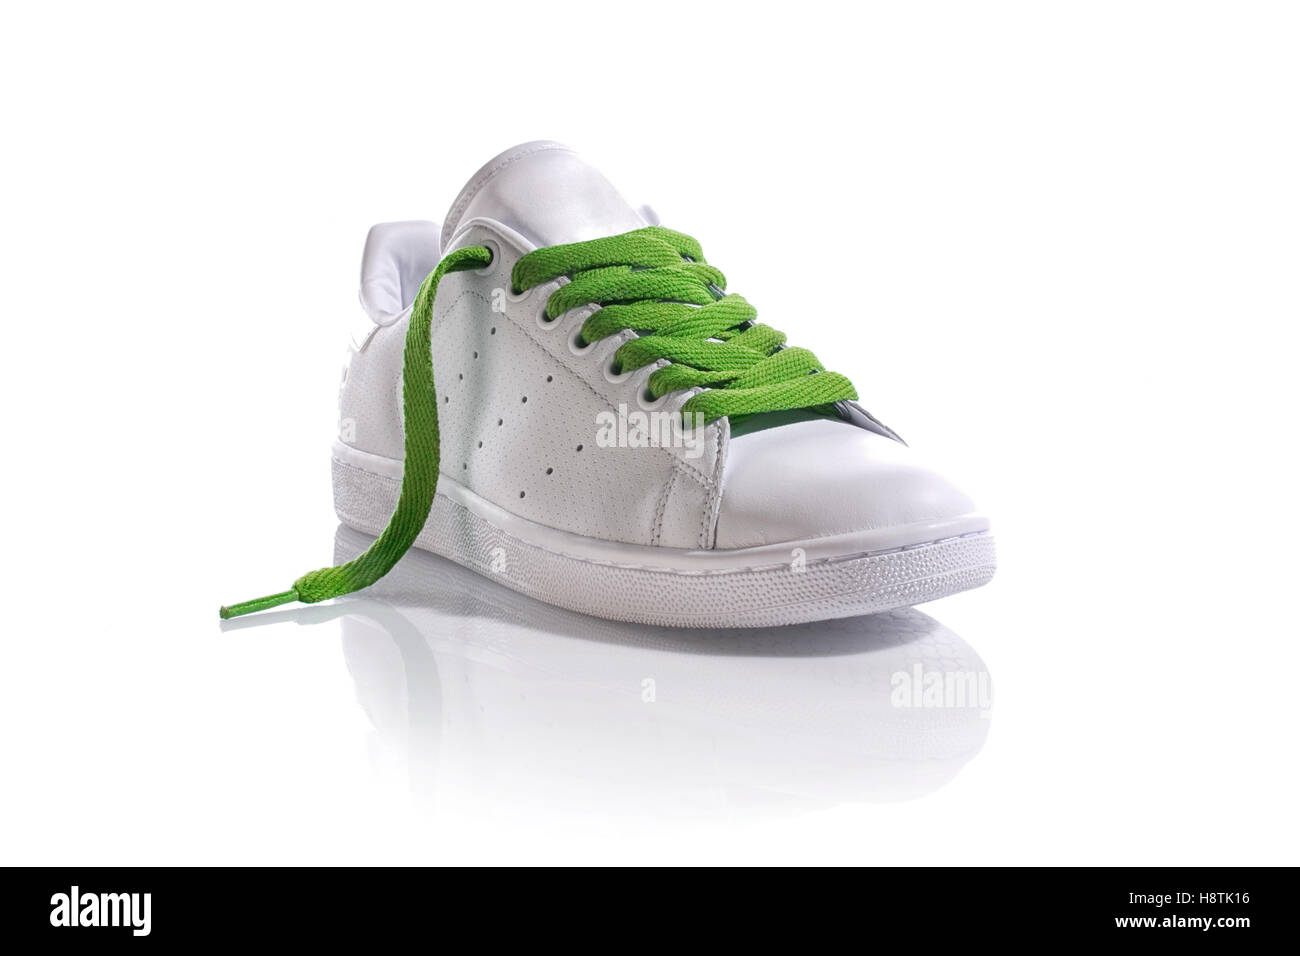 White sneaker with green laces on white 